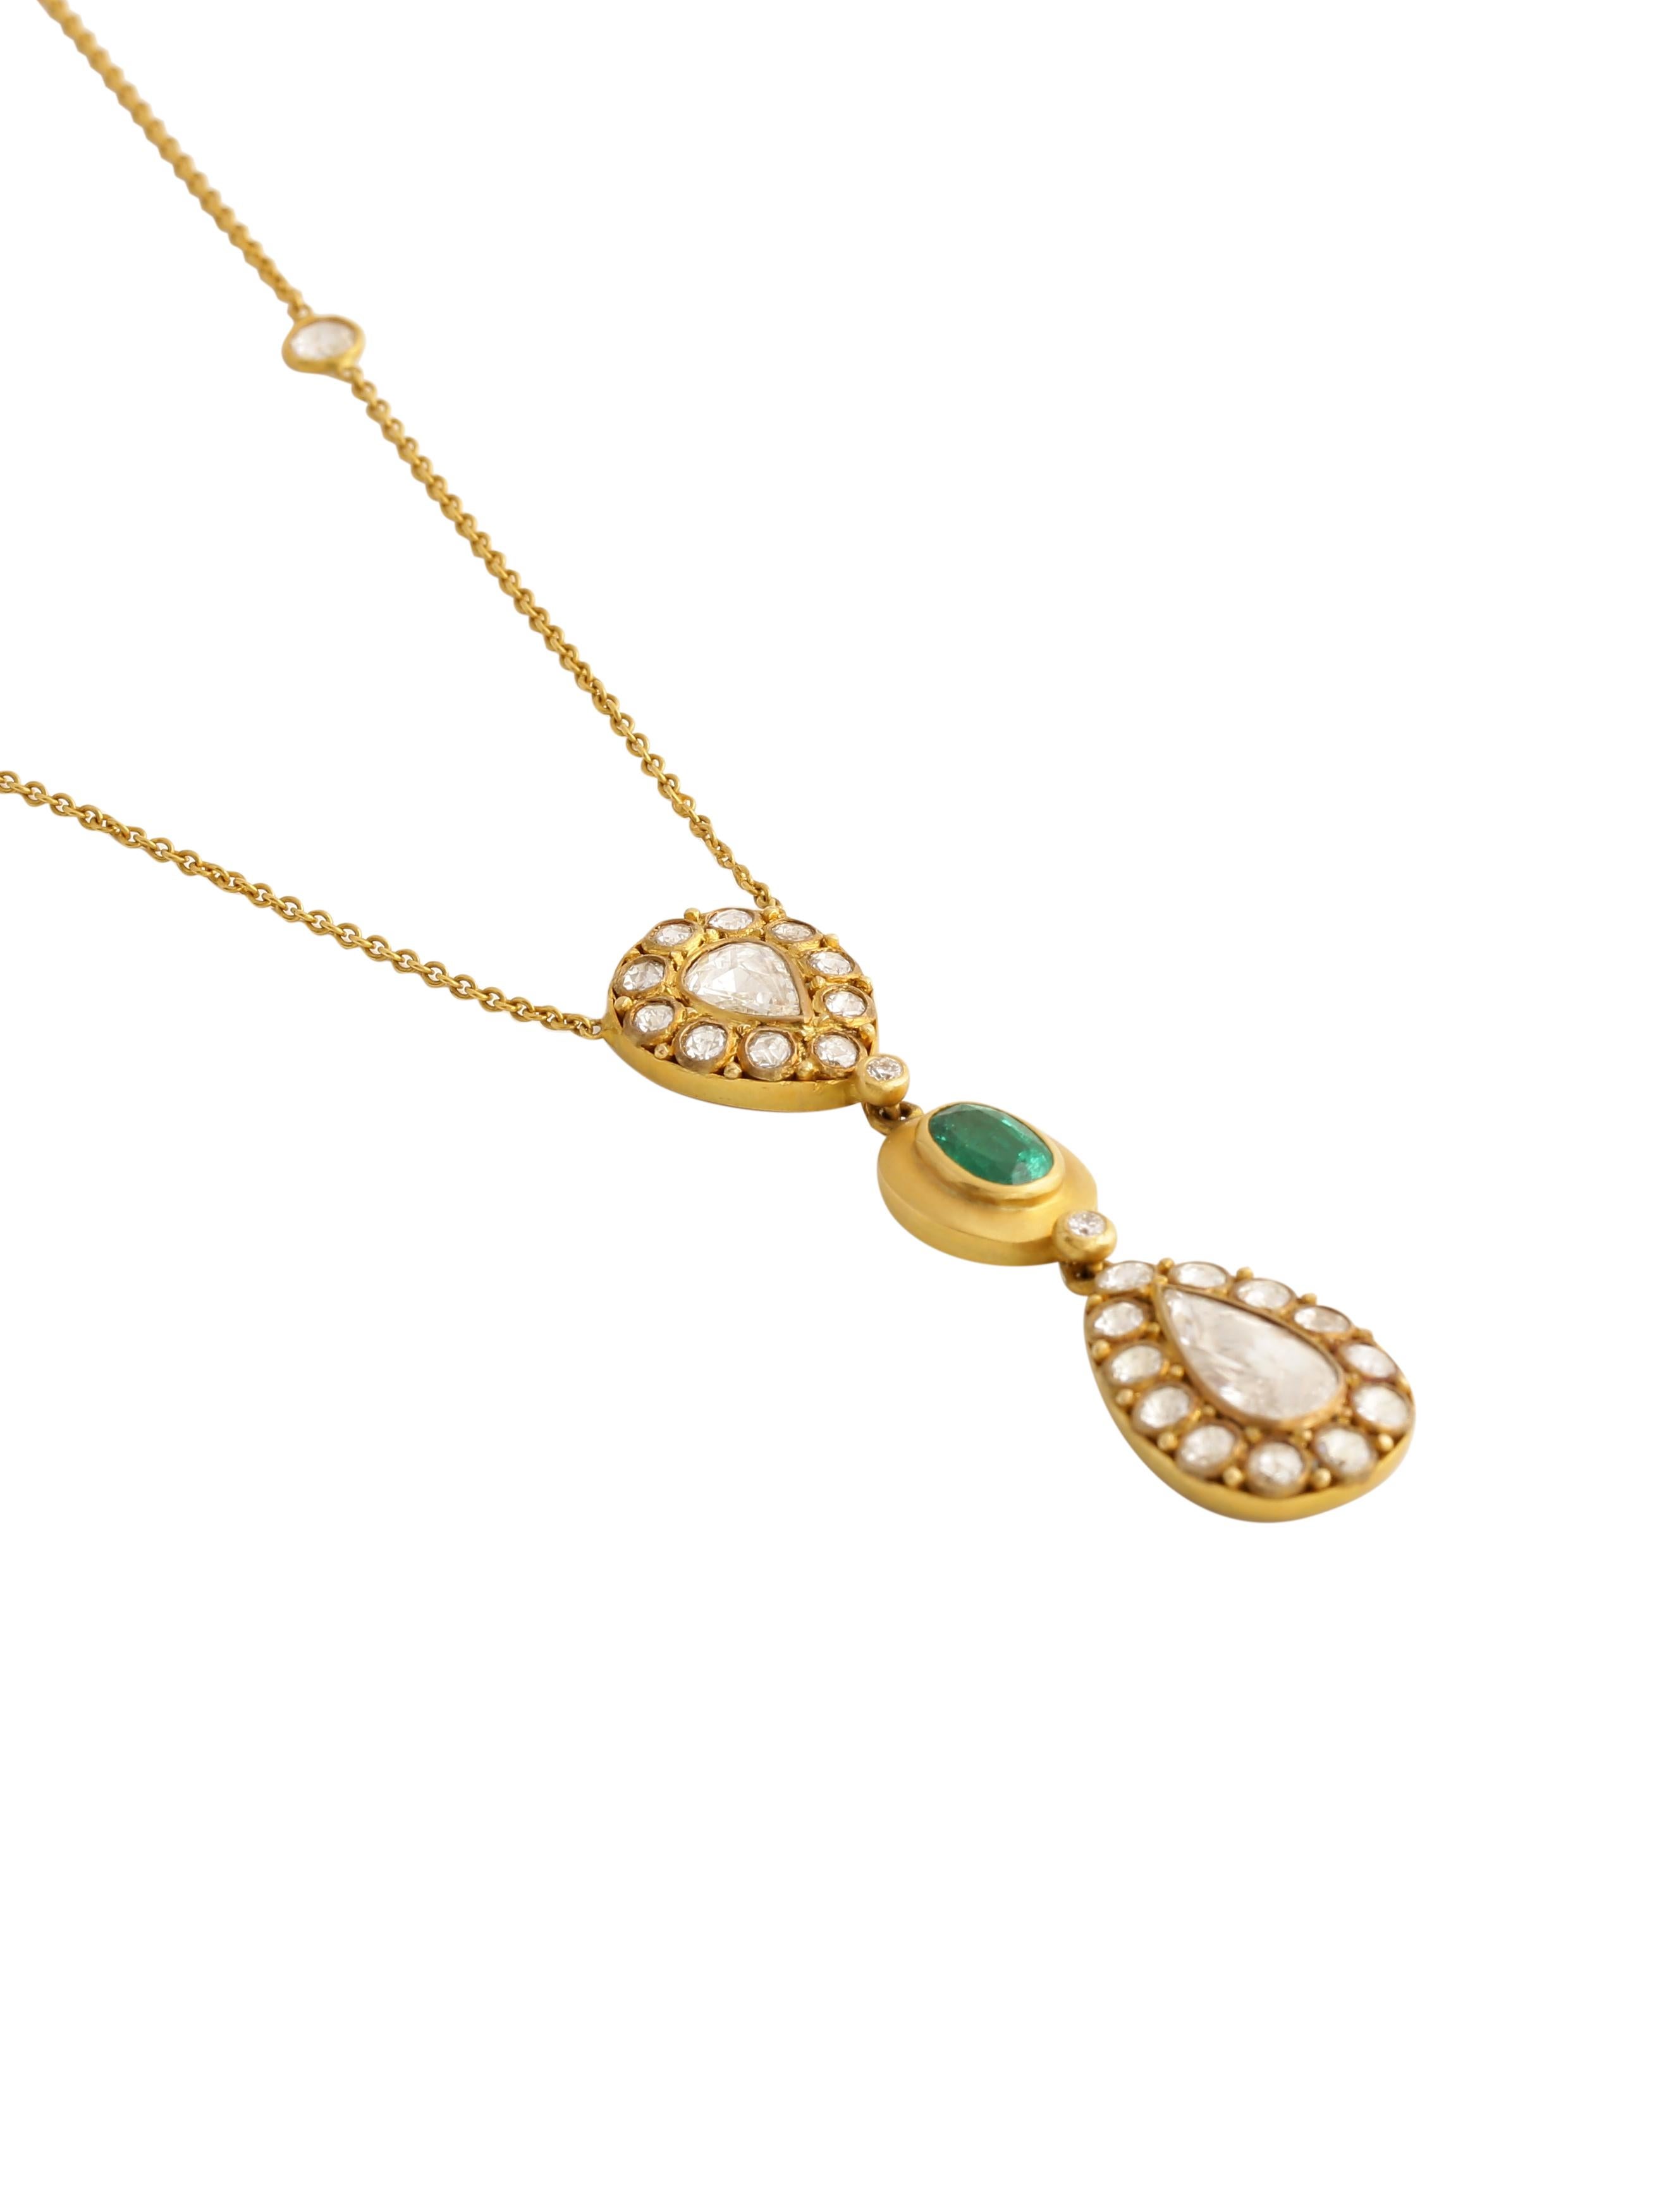 Necklace with 2.28 Carats Diamonds and Emeralds Handcrafted in 18k Gold For Sale 3